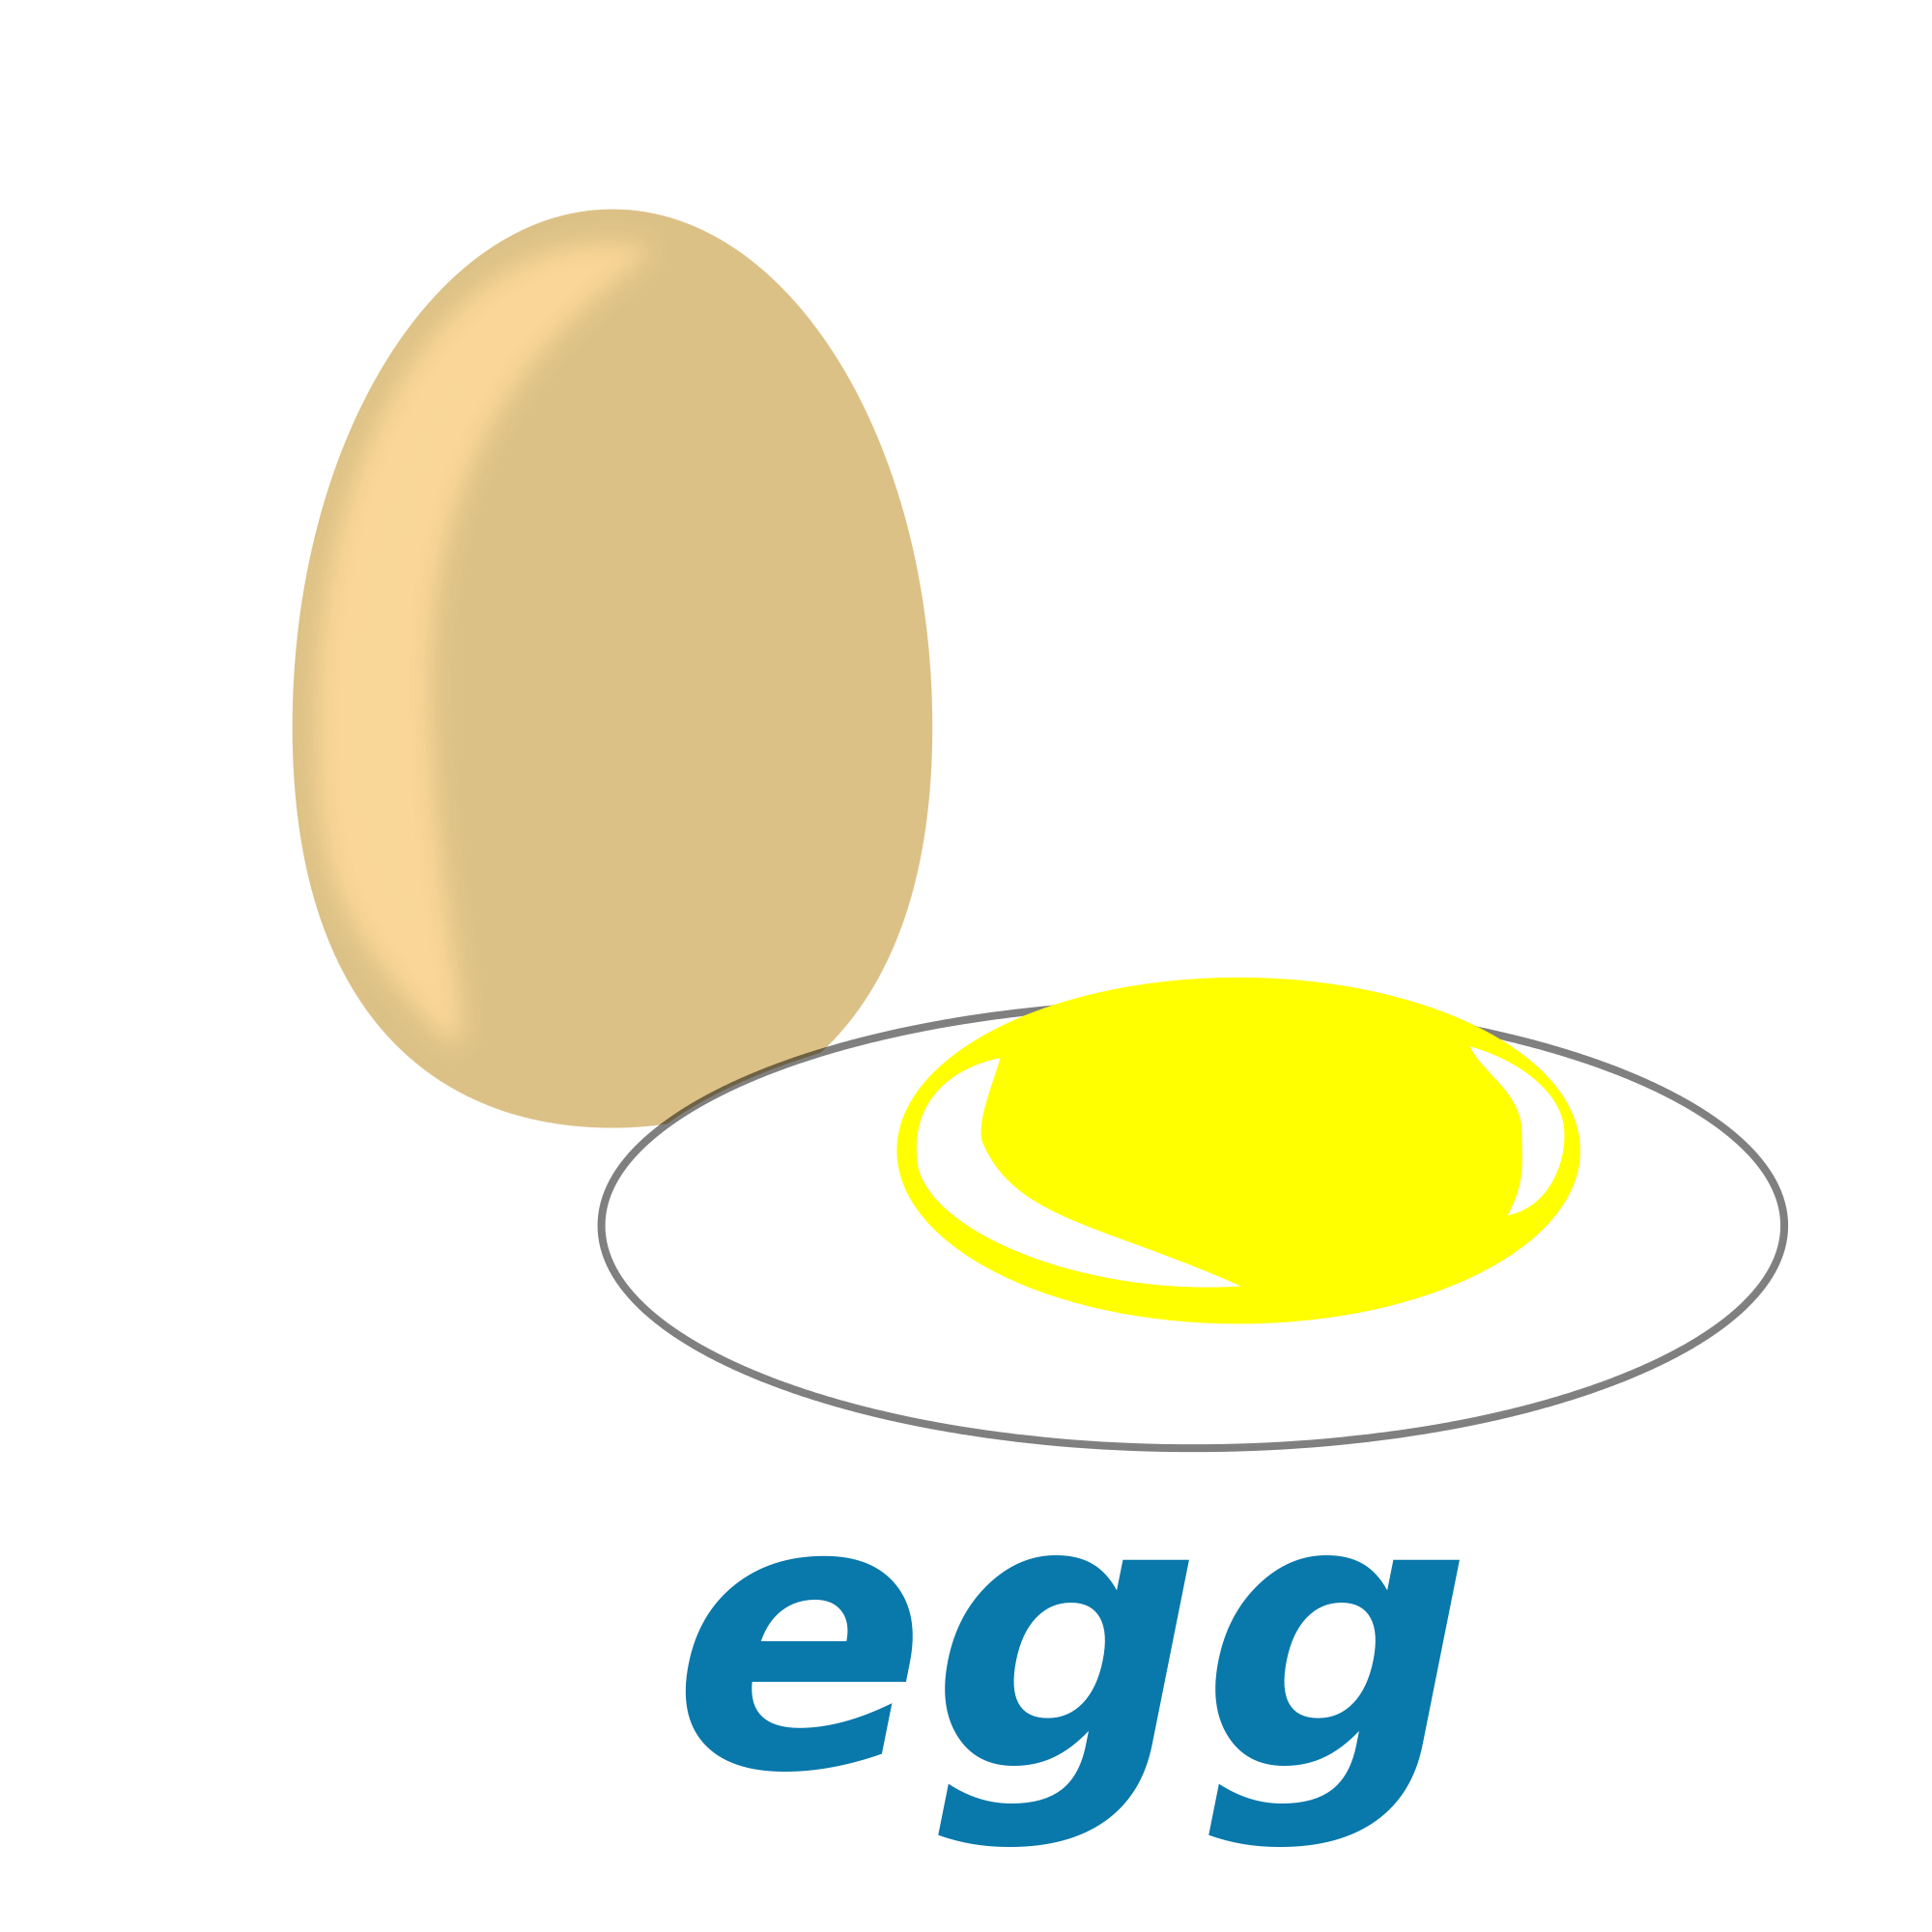 eggs clipart protein